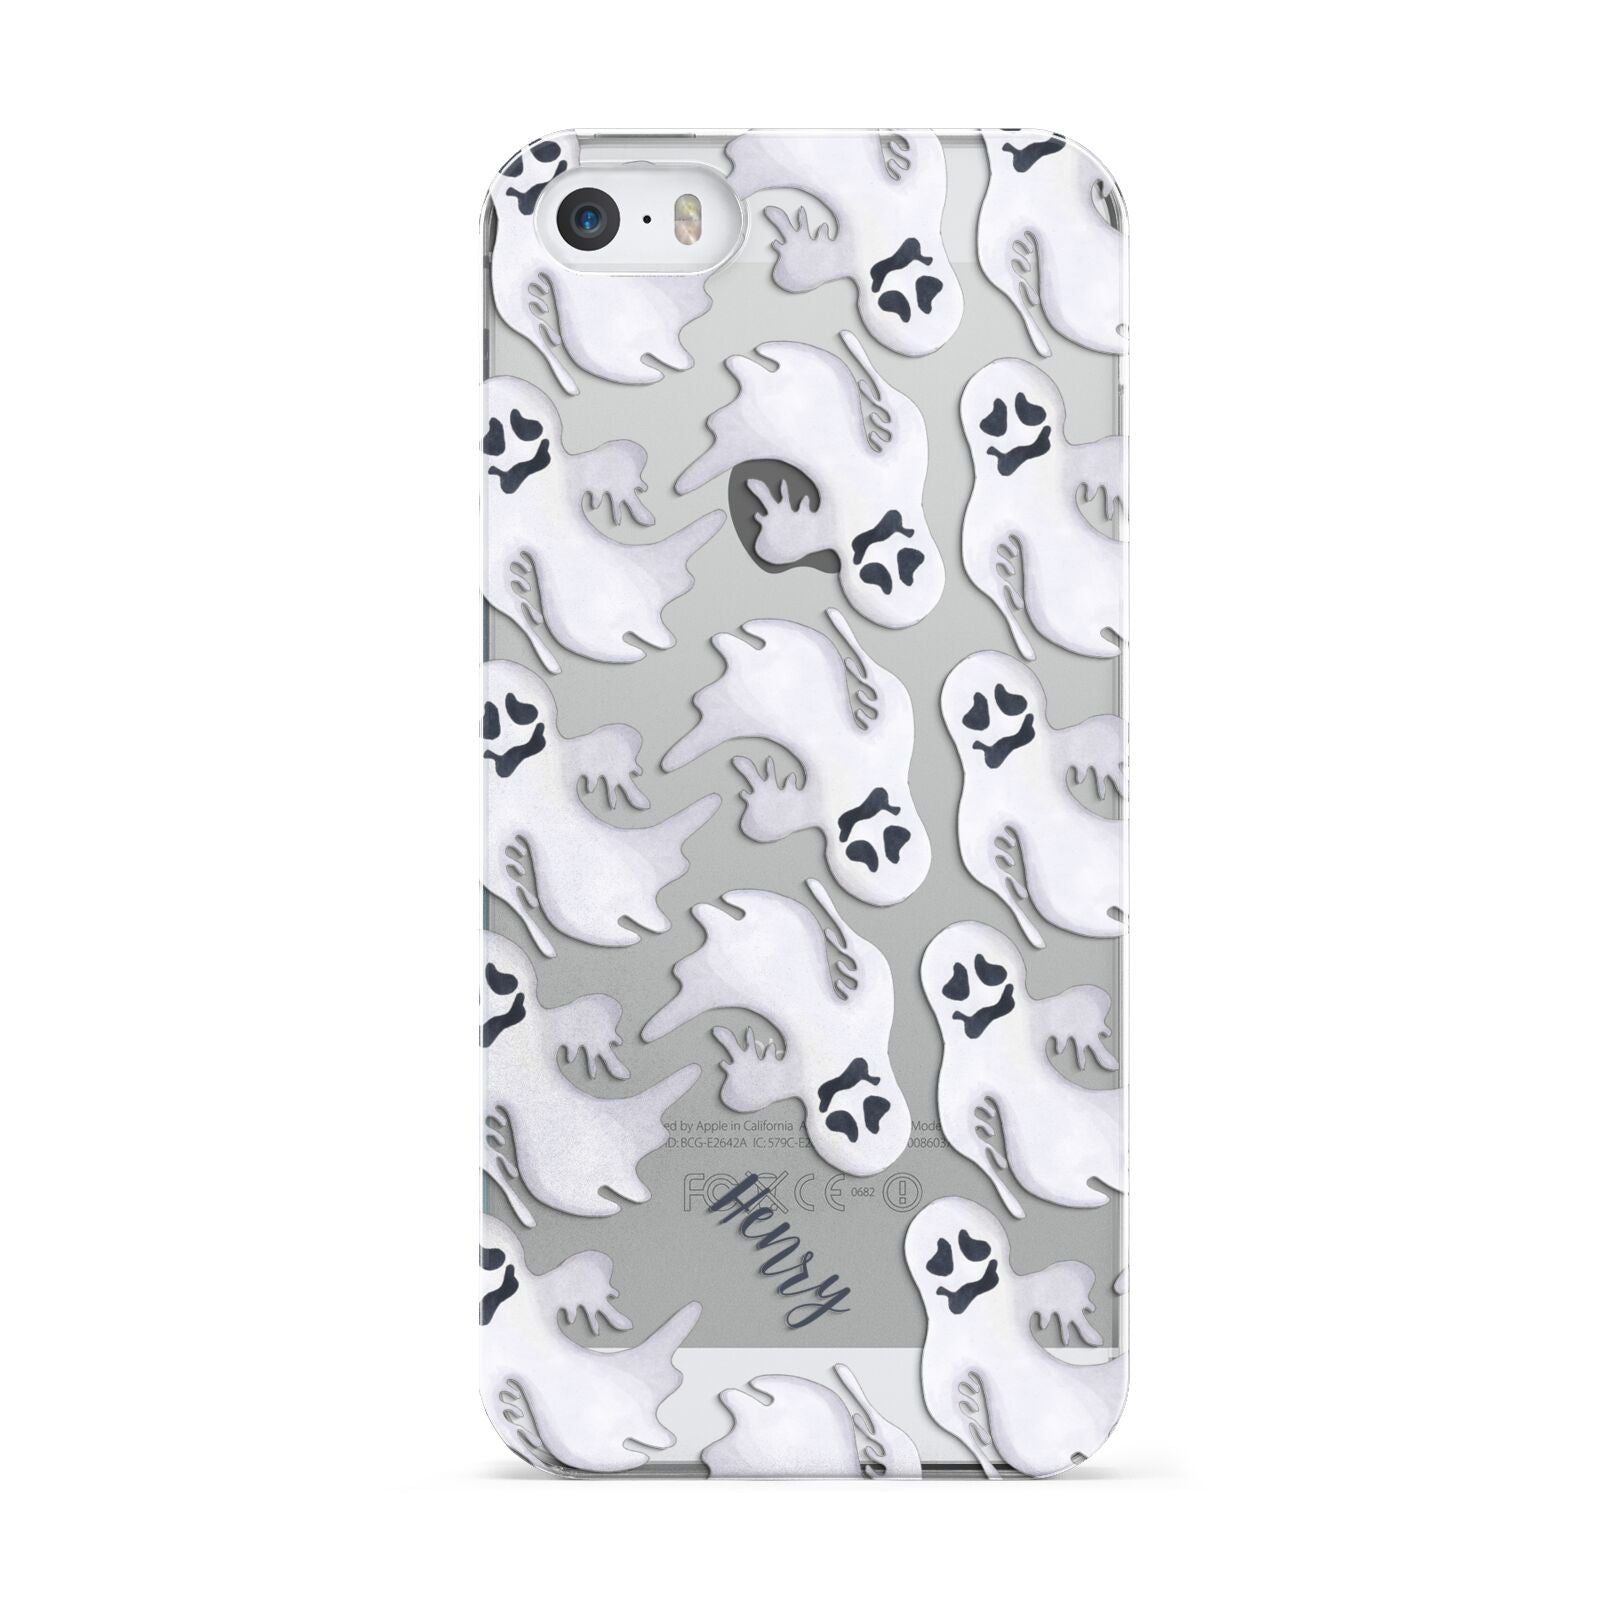 Floaty Ghosts Personalised Apple iPhone 5 Case